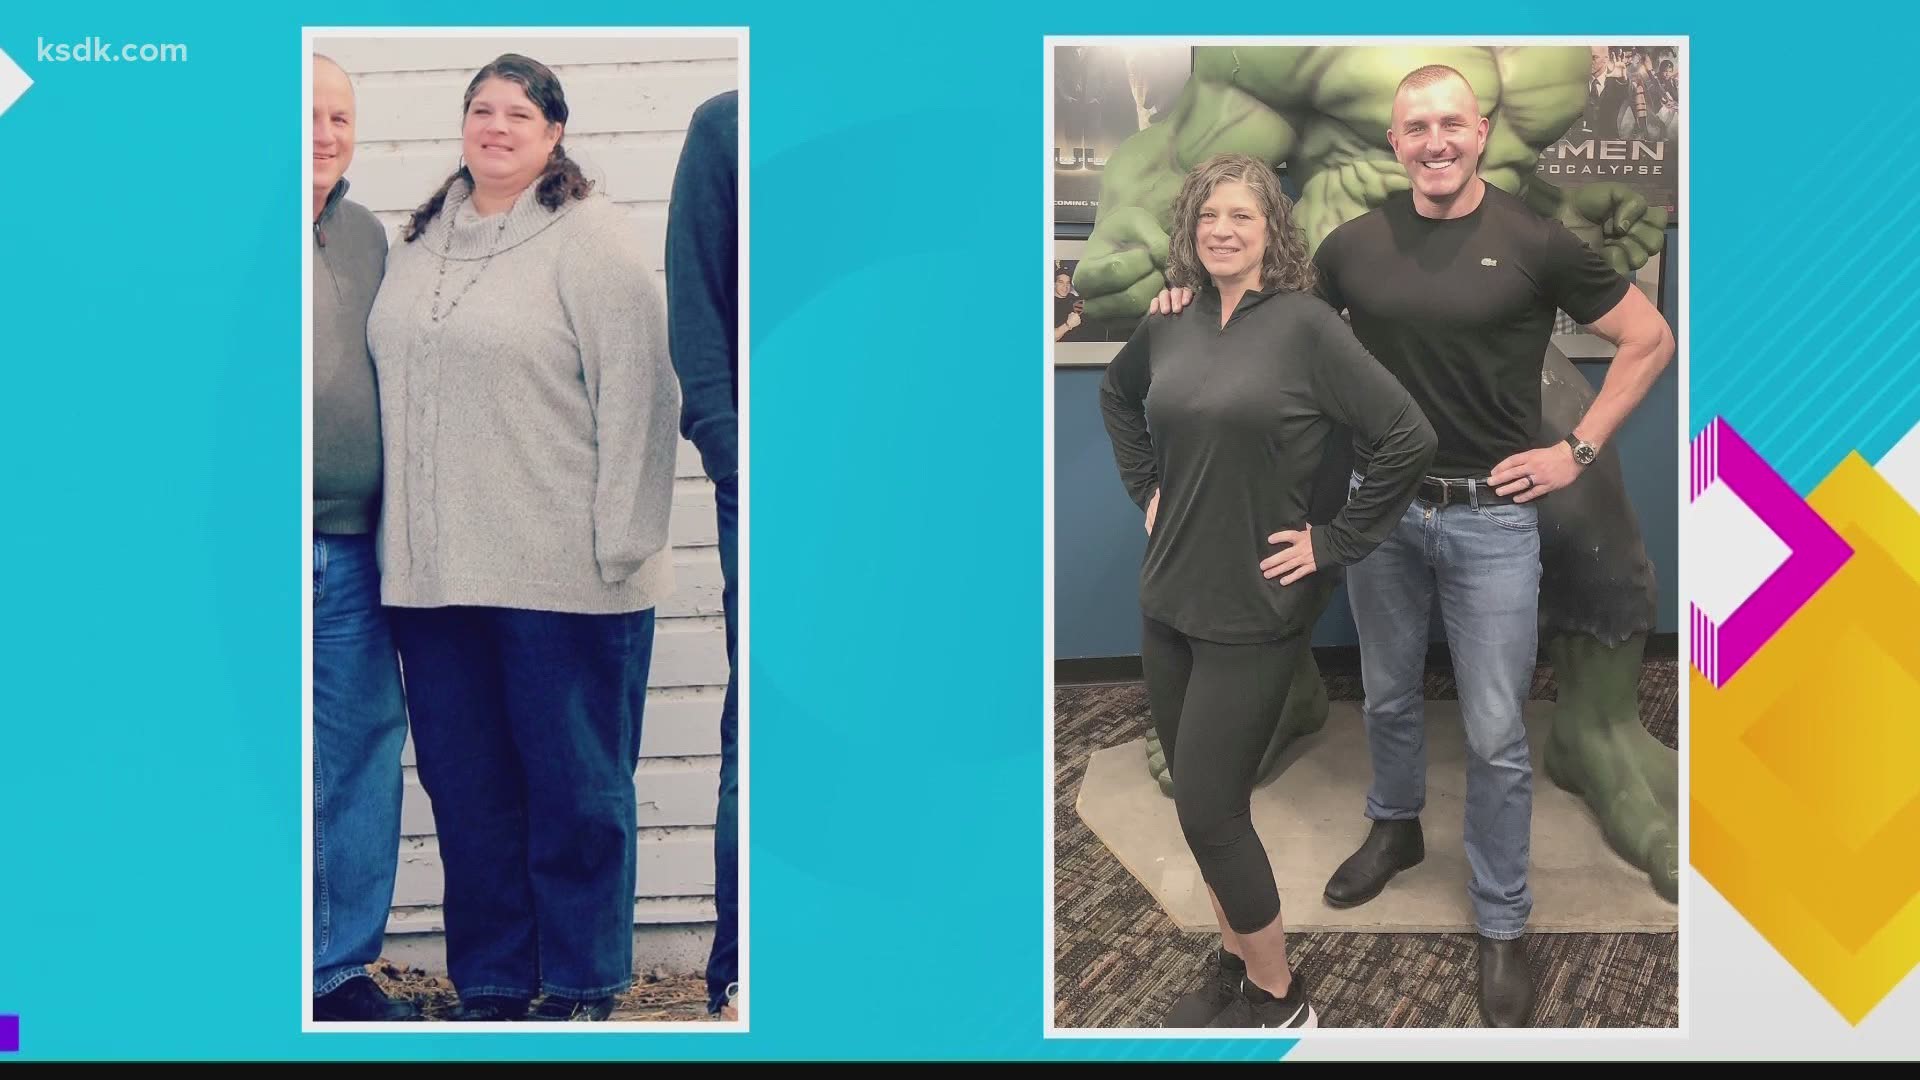 Lisa was able to 100 pounds on her own but needed Charles D’Angelo’s help to keep going past that number.